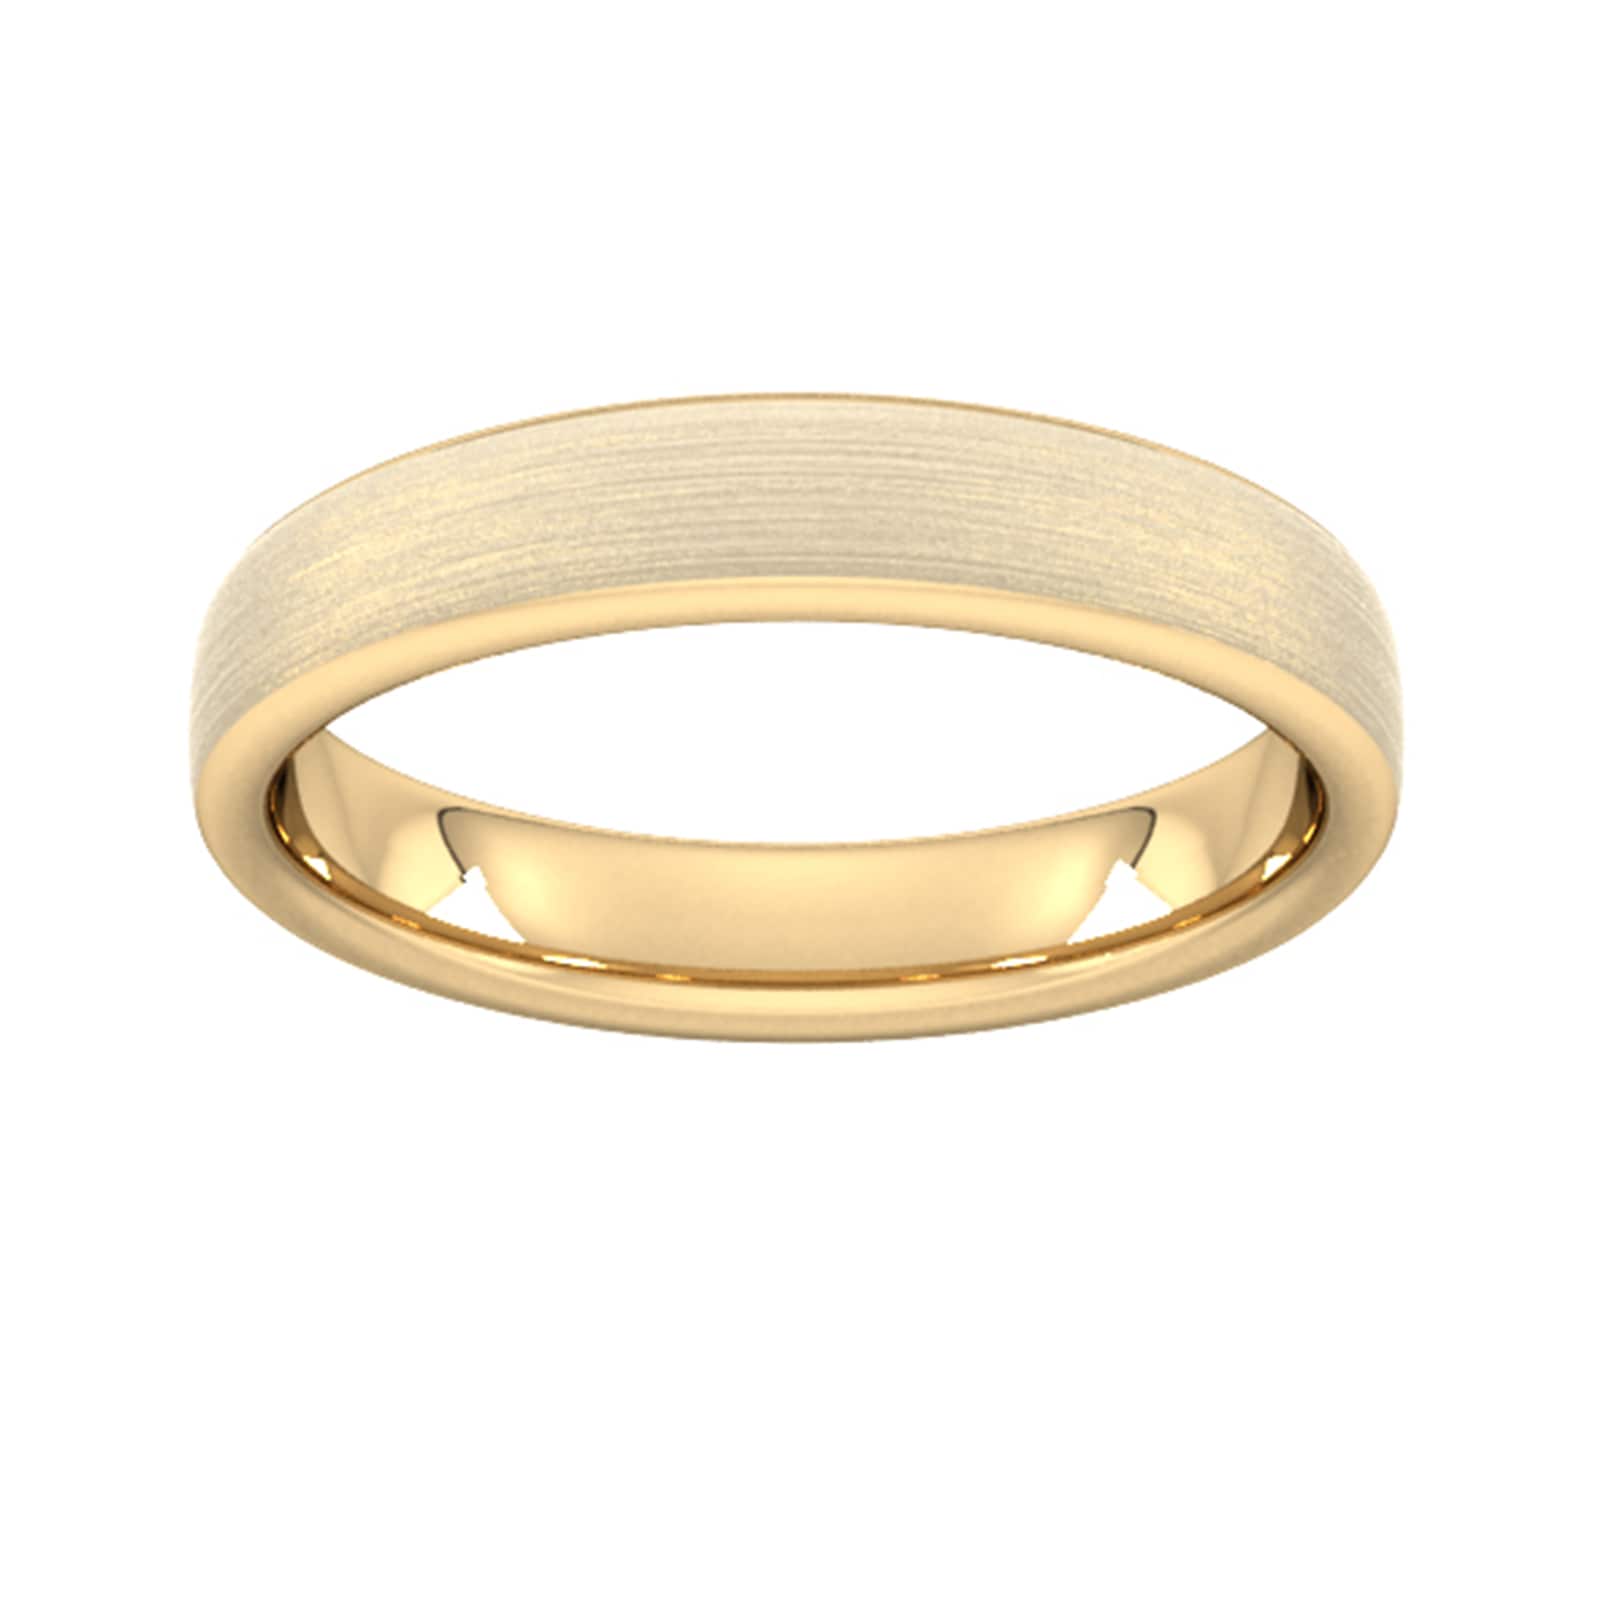 4mm Slight Court Extra Heavy Matt Finished Wedding Ring In 18 Carat Yellow Gold - Ring Size W